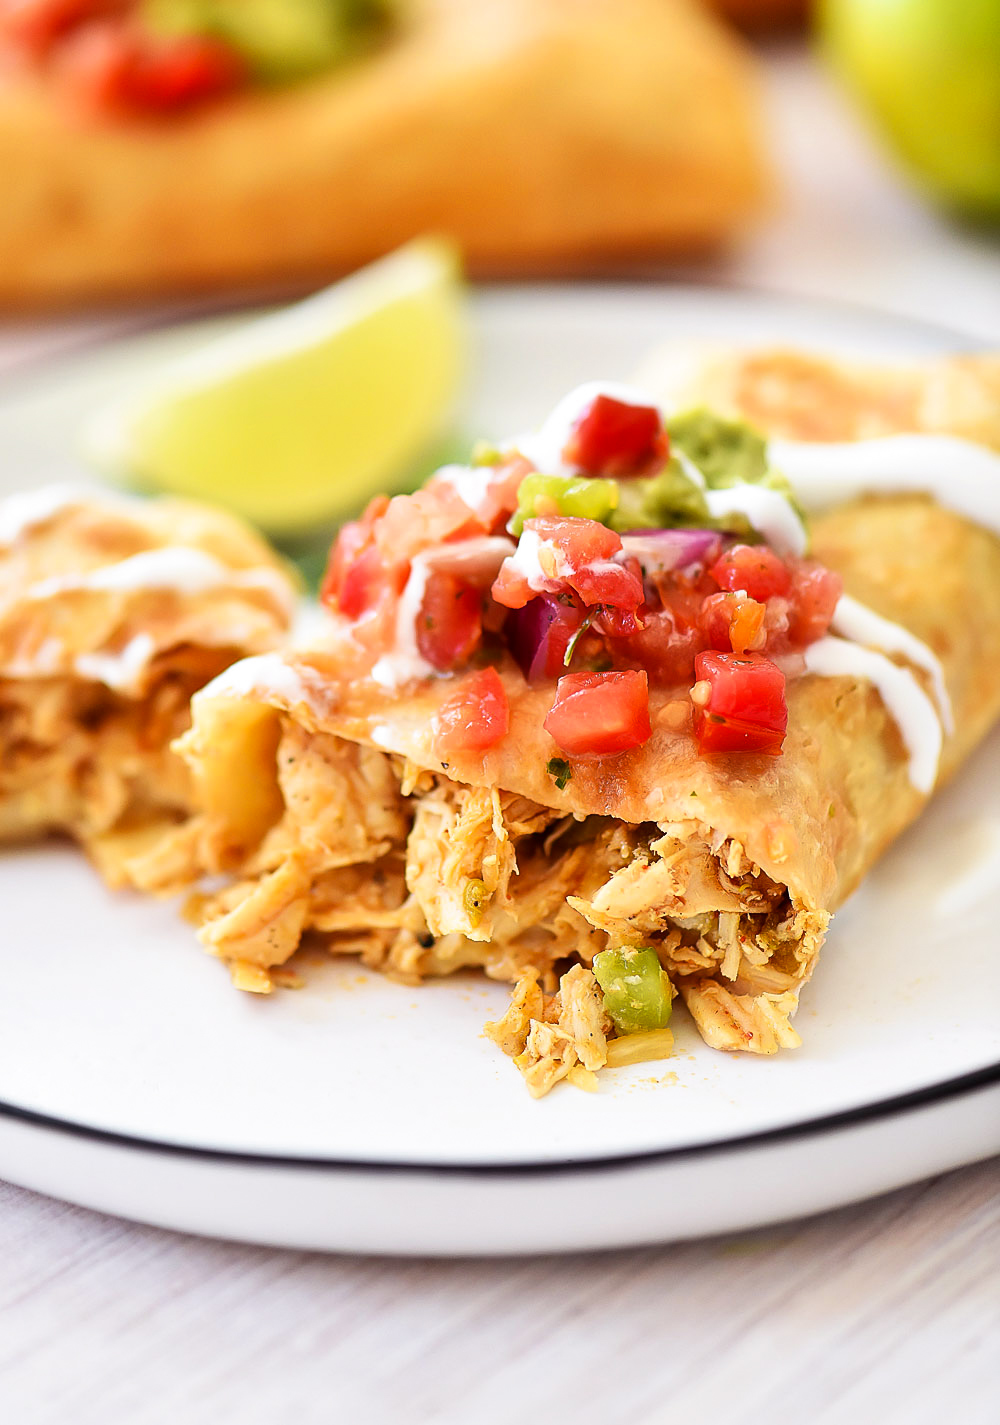 Chicken Chimichangas are filled with flavorful shredded chicken, Monterey jack cheese and diced green chilies. Life-in-the-Lofthouse.com